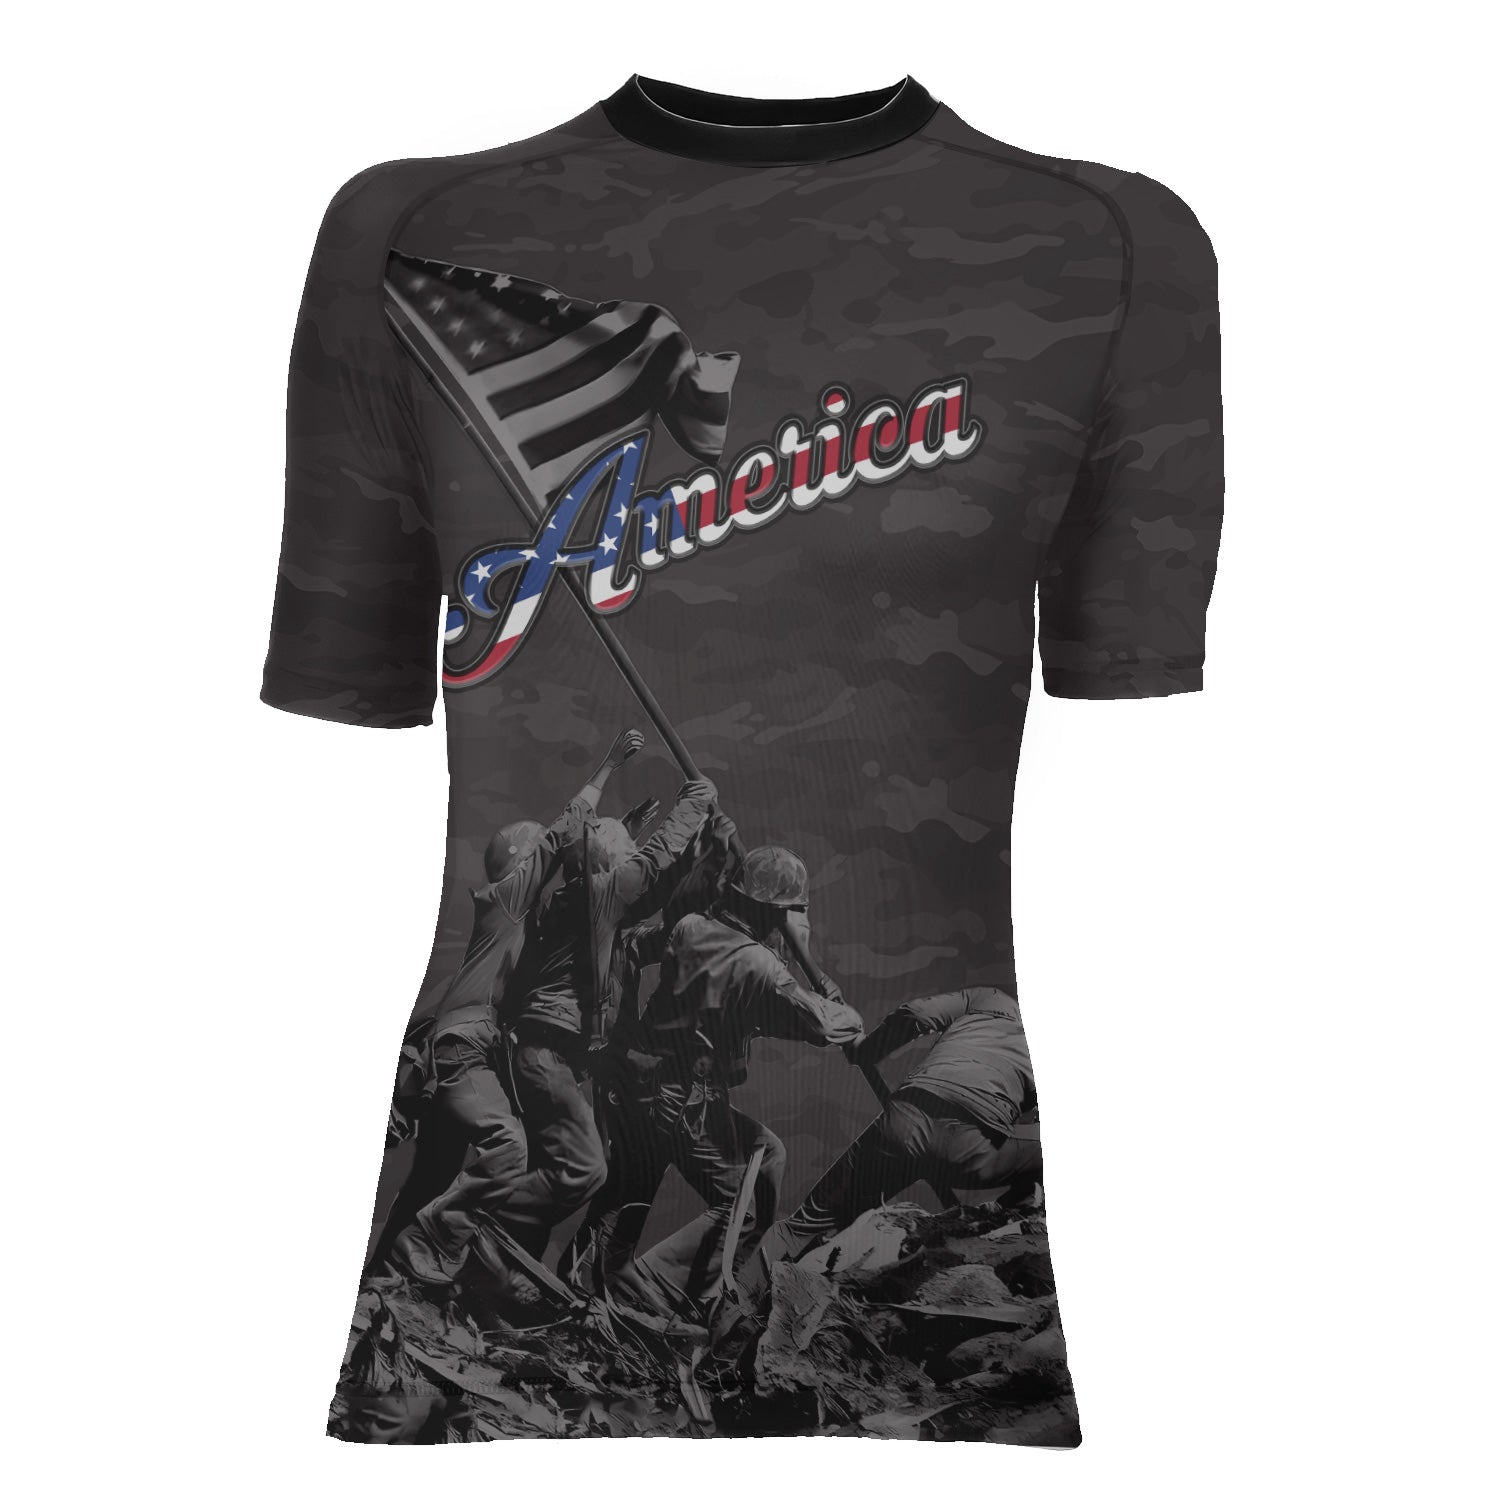 American Independence Day Women's Short Sleeve Rash Guard